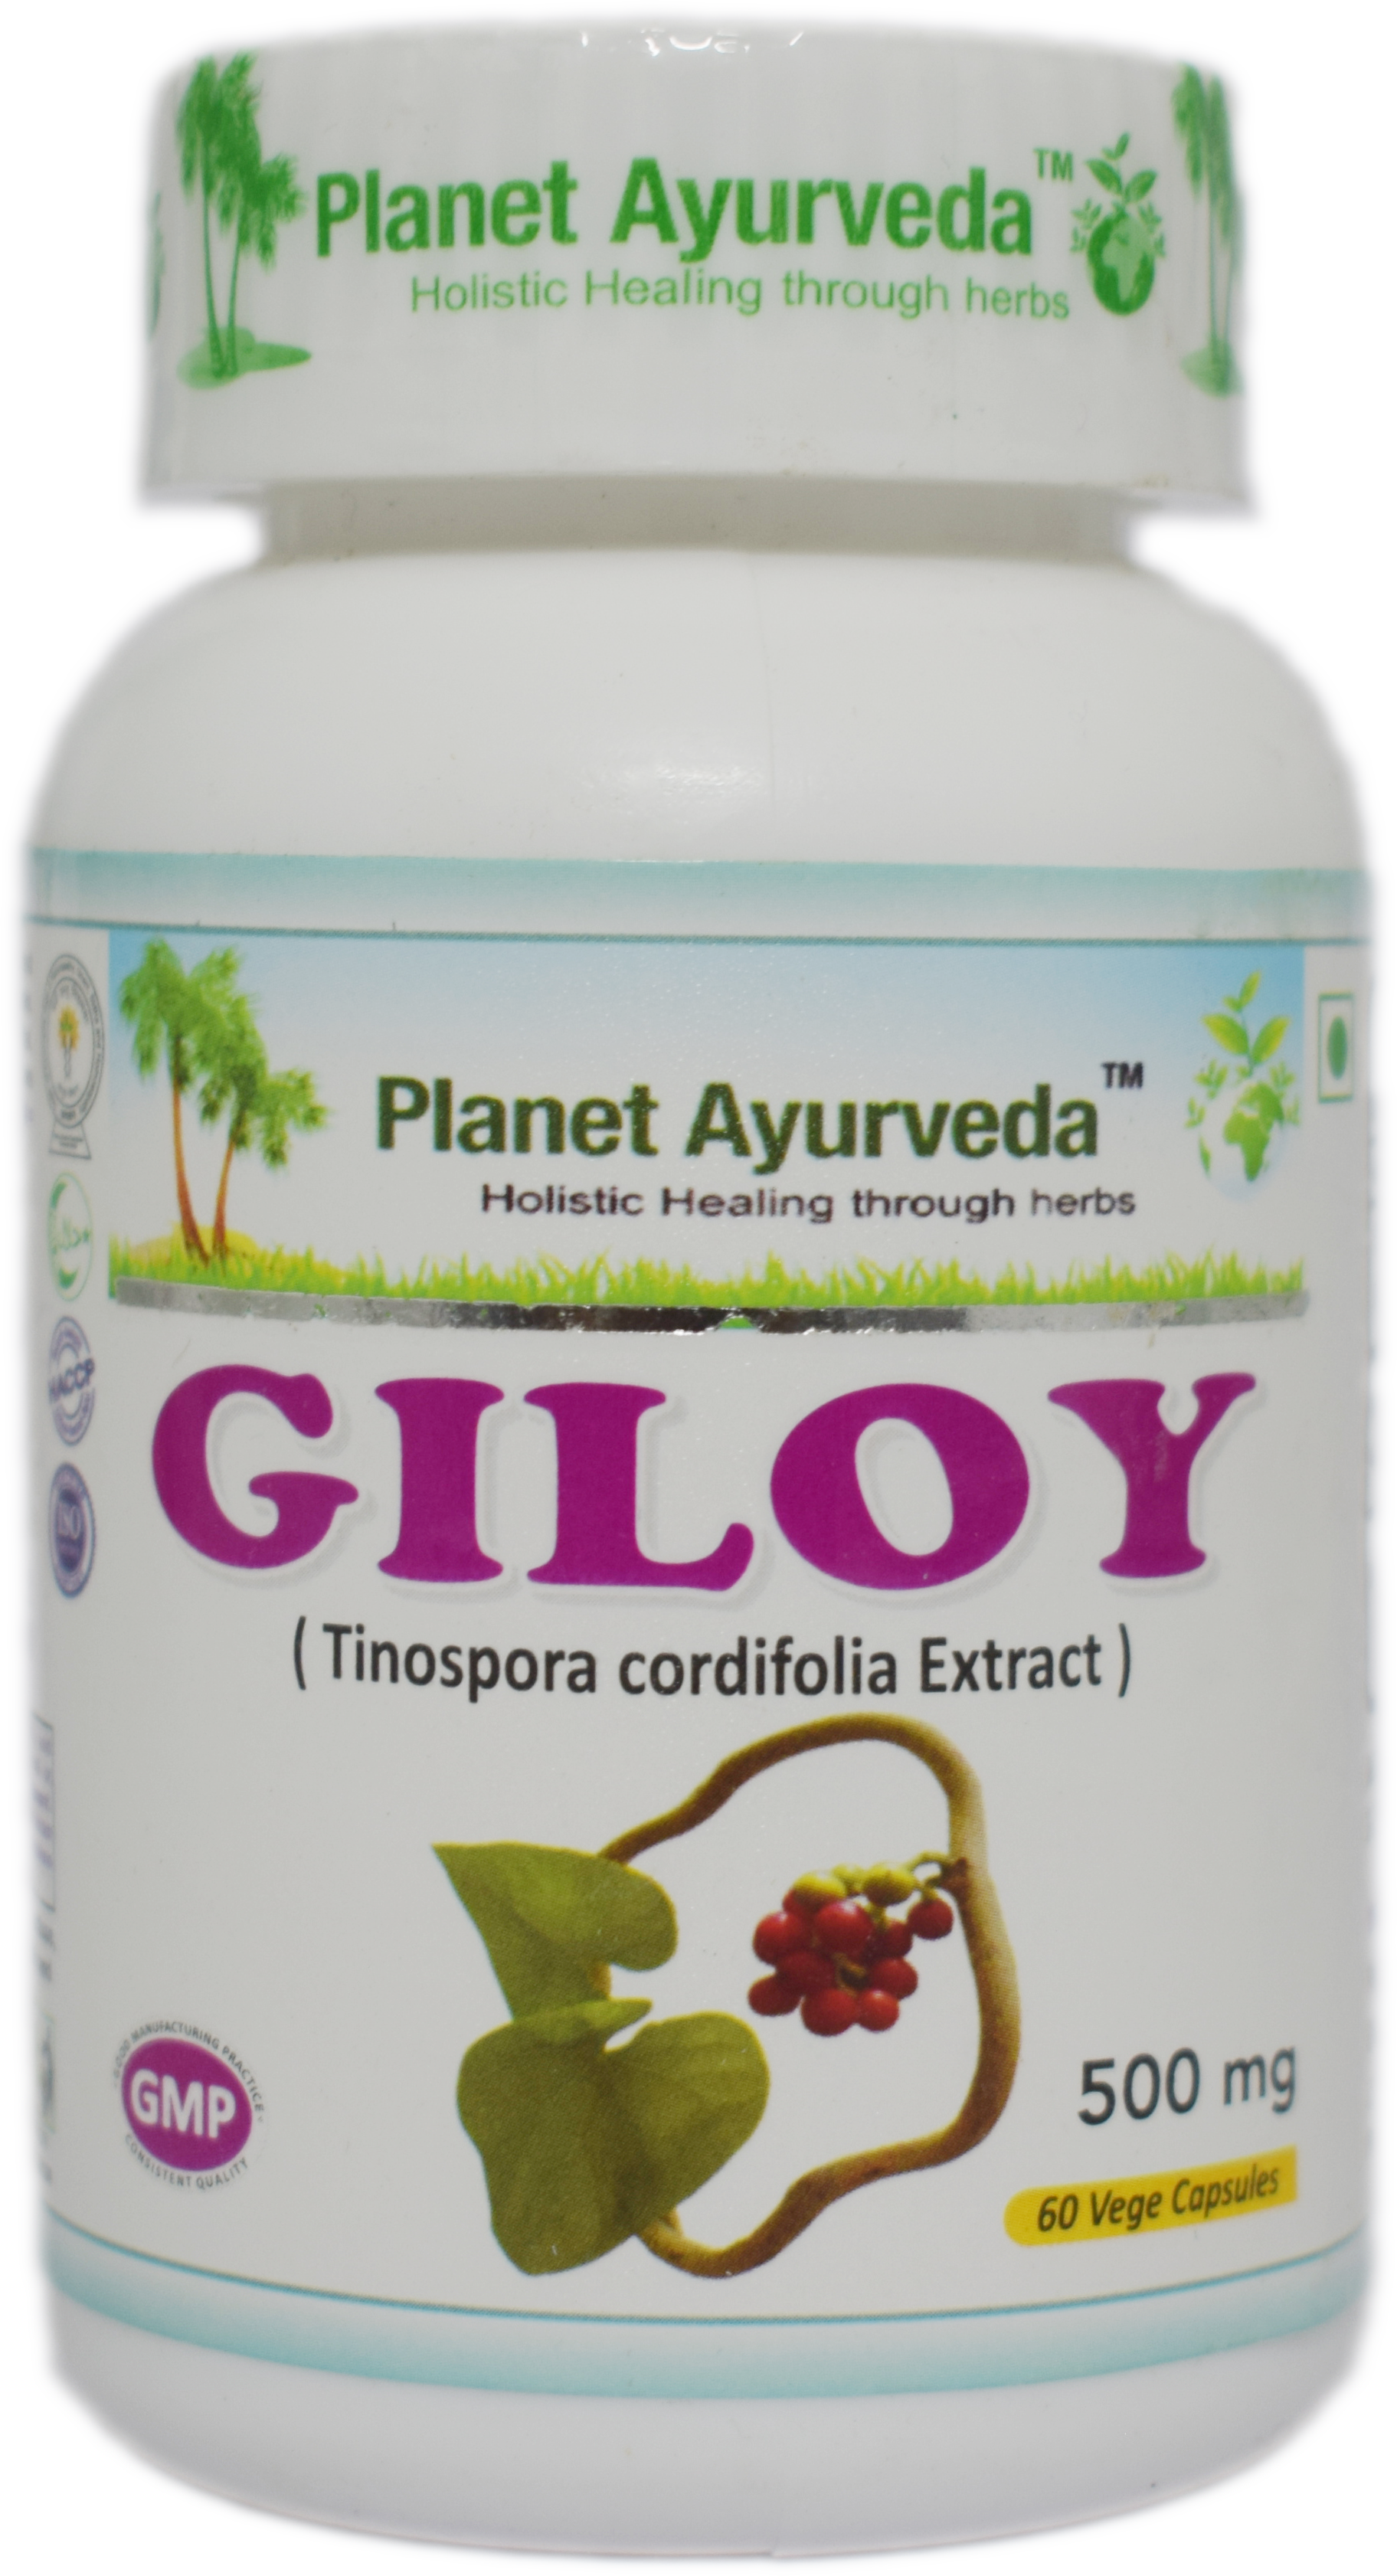 Buy Planet Ayurveda Giloy Capsules at Best Price Online